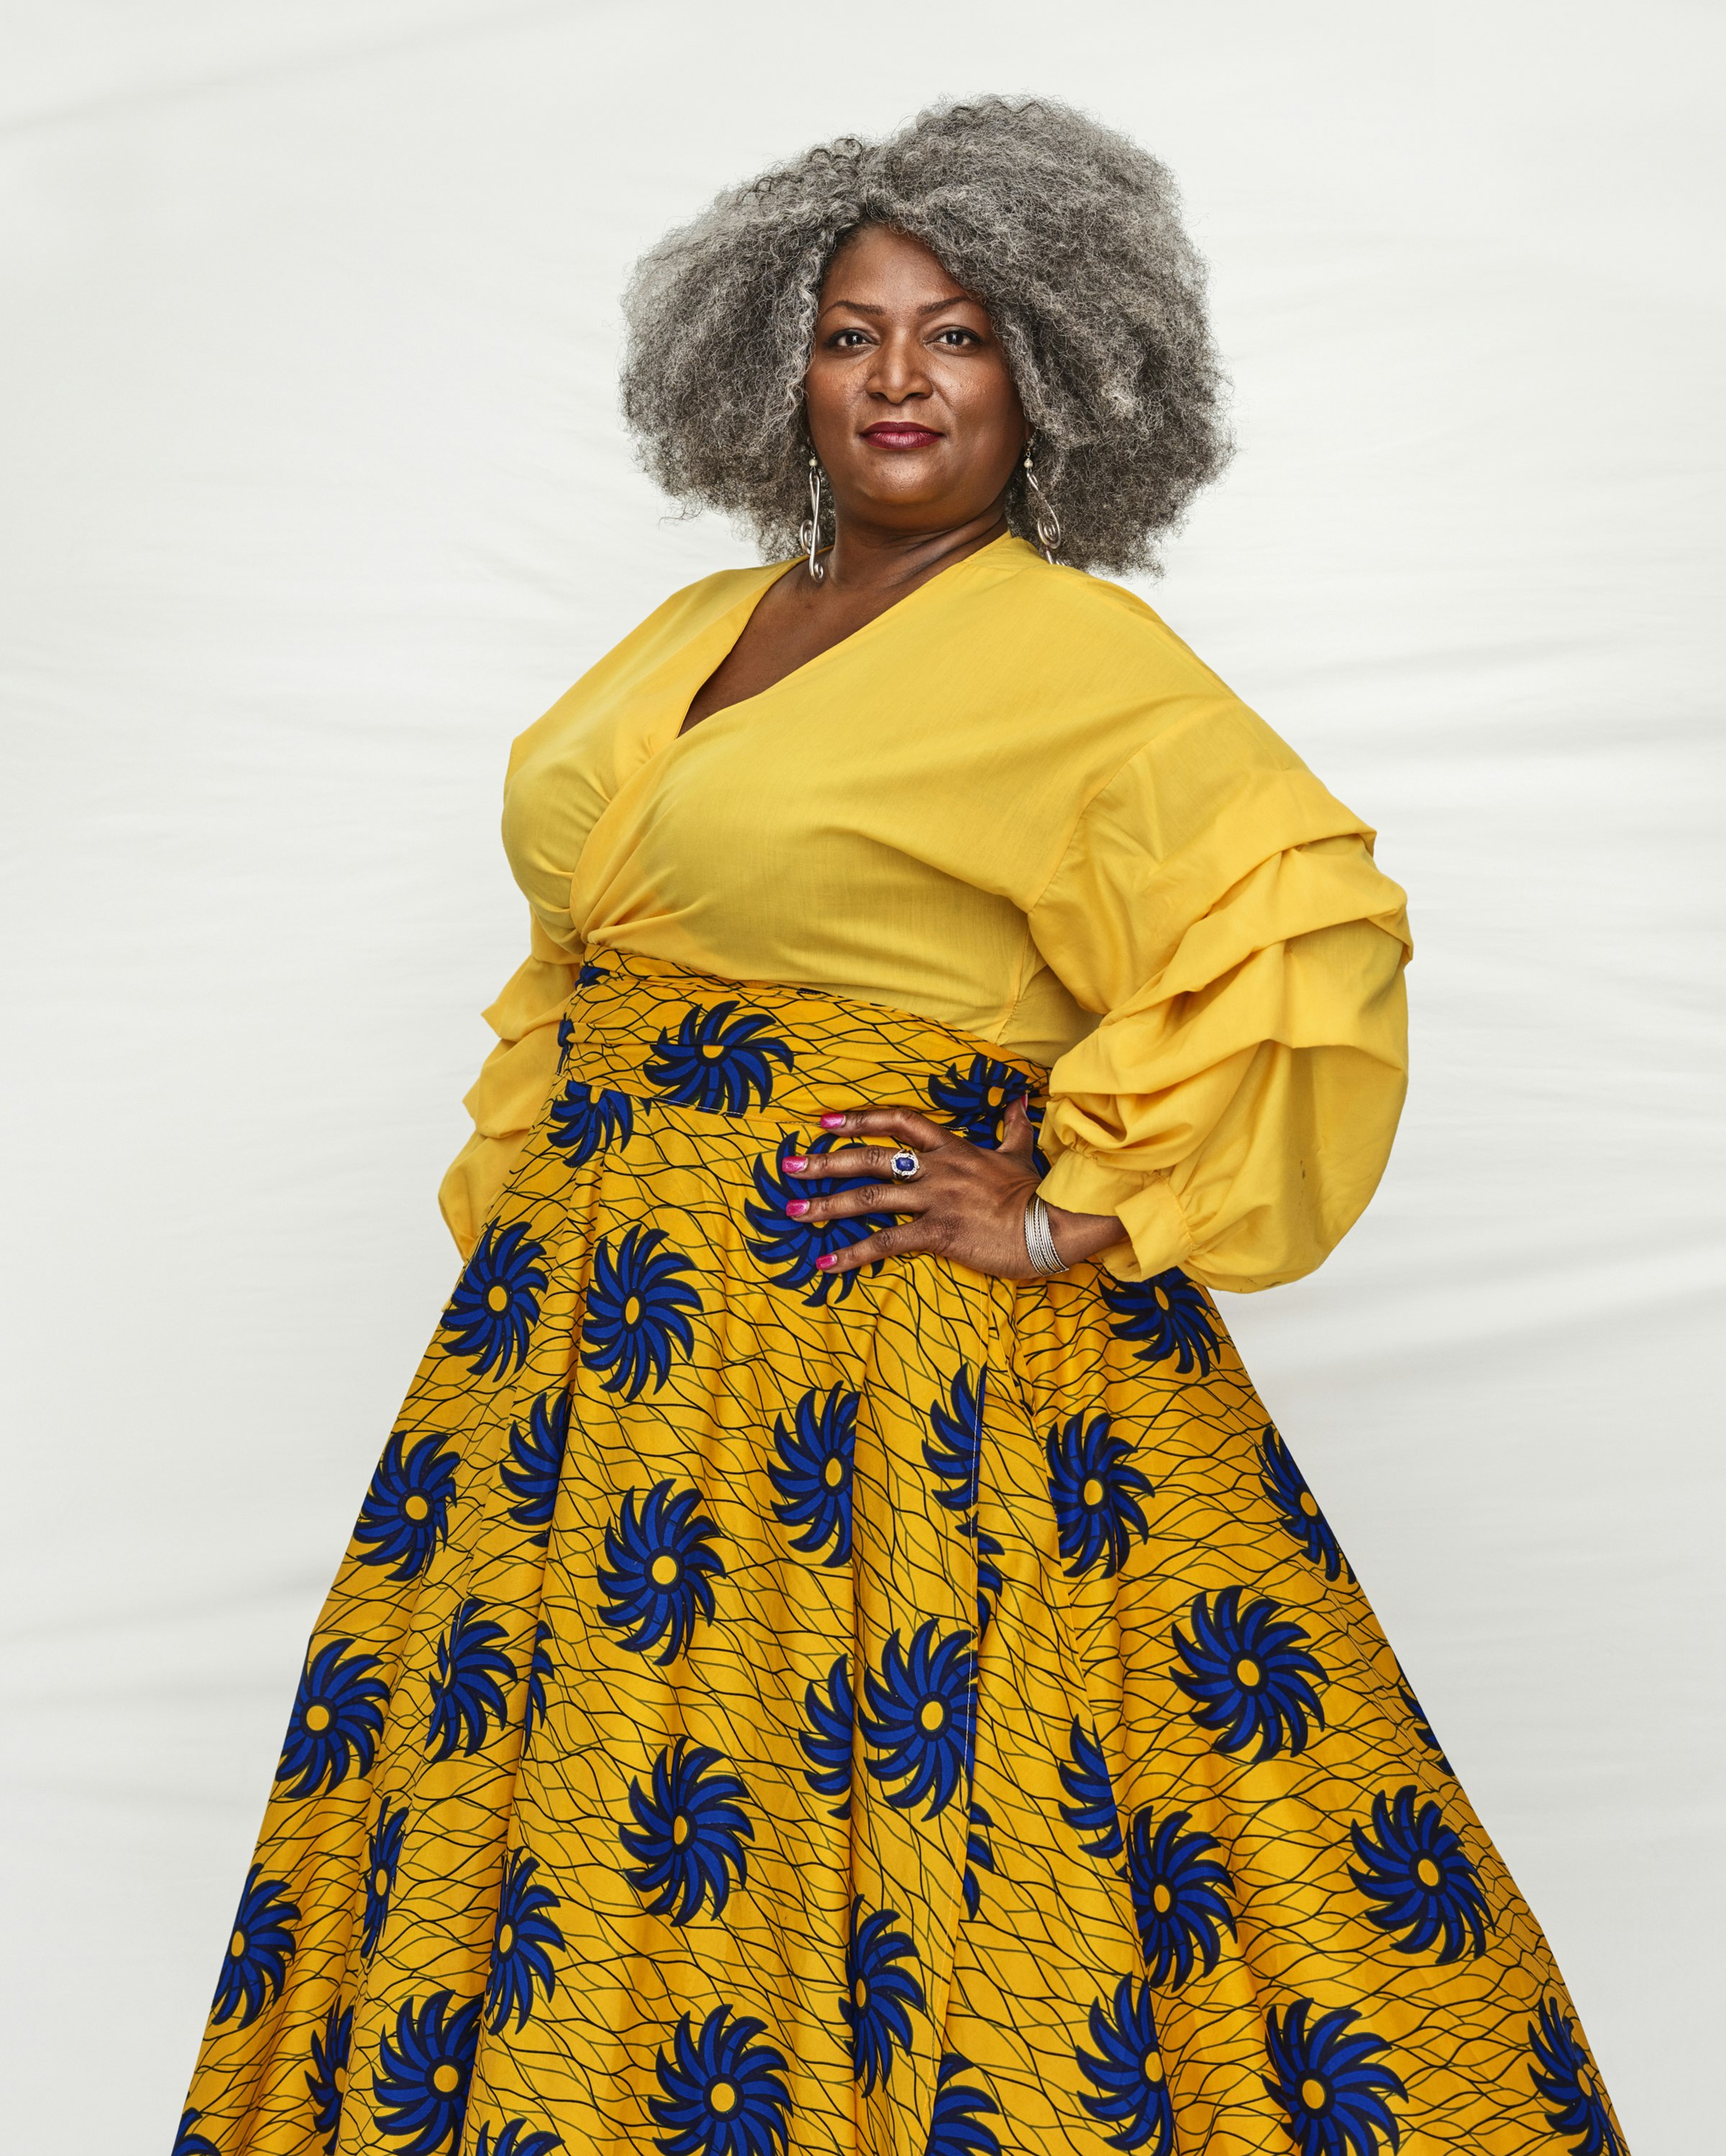 A black woman with grey curl hair stands with her hands on her hips. She's wearing a vibrant yellow shirt and a yellow skirt with bright blue flowers all over it.